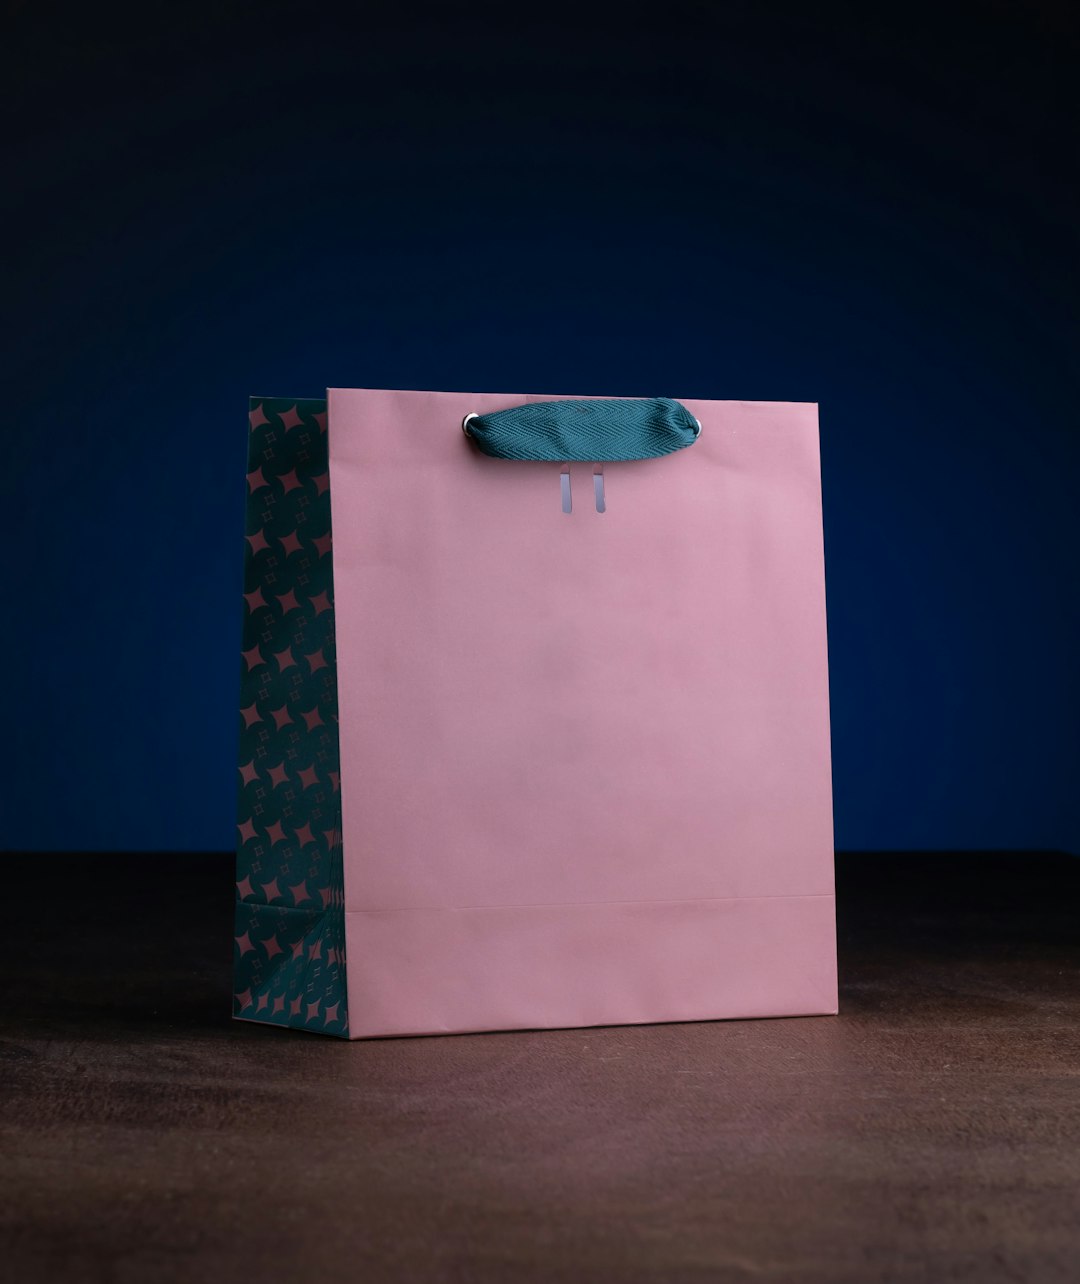 Closeup shot of a pink paper shopping bag on a dark background on top of a wooden table